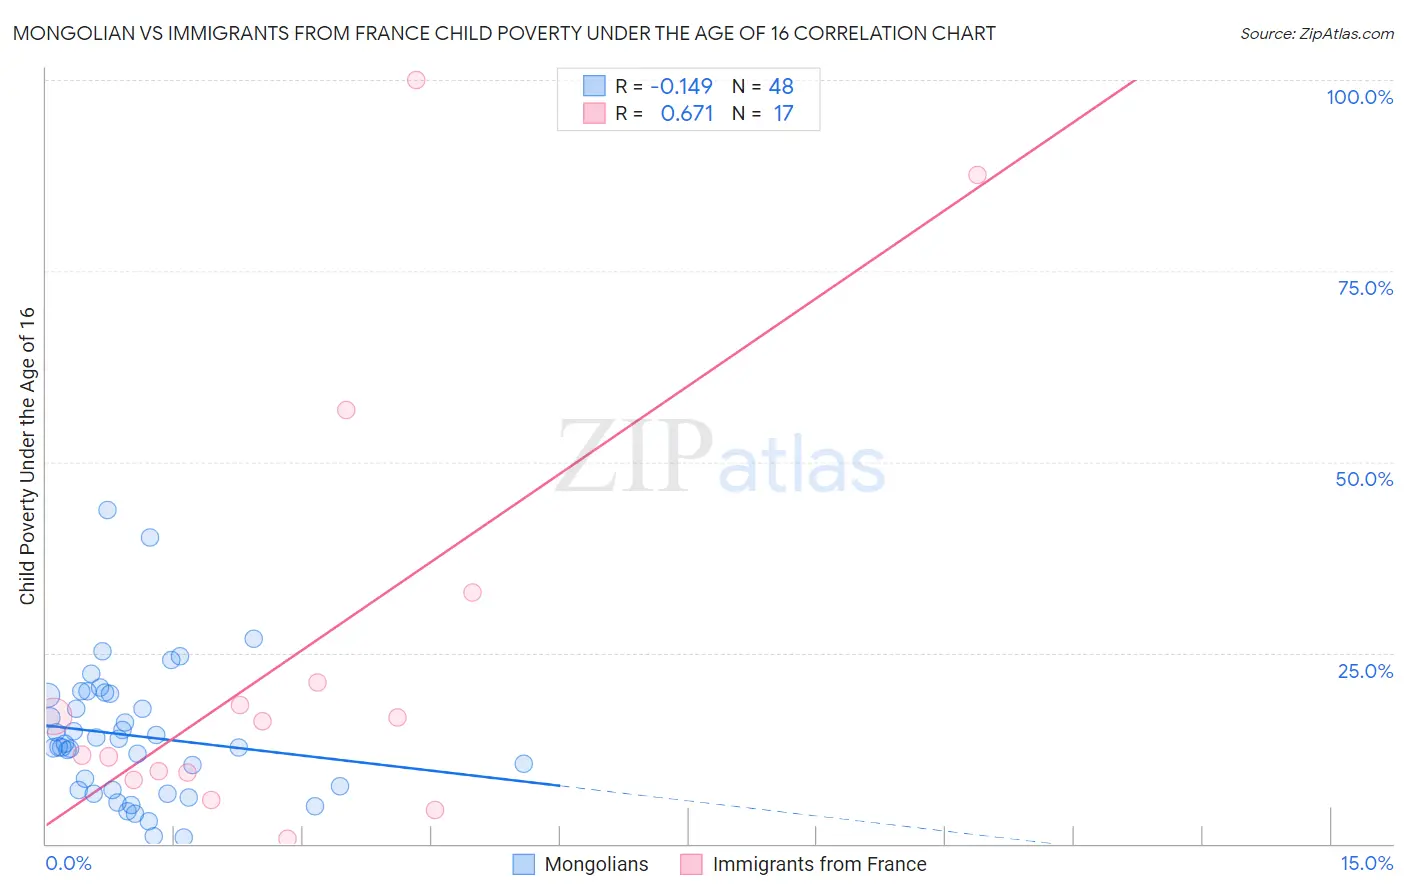 Mongolian vs Immigrants from France Child Poverty Under the Age of 16